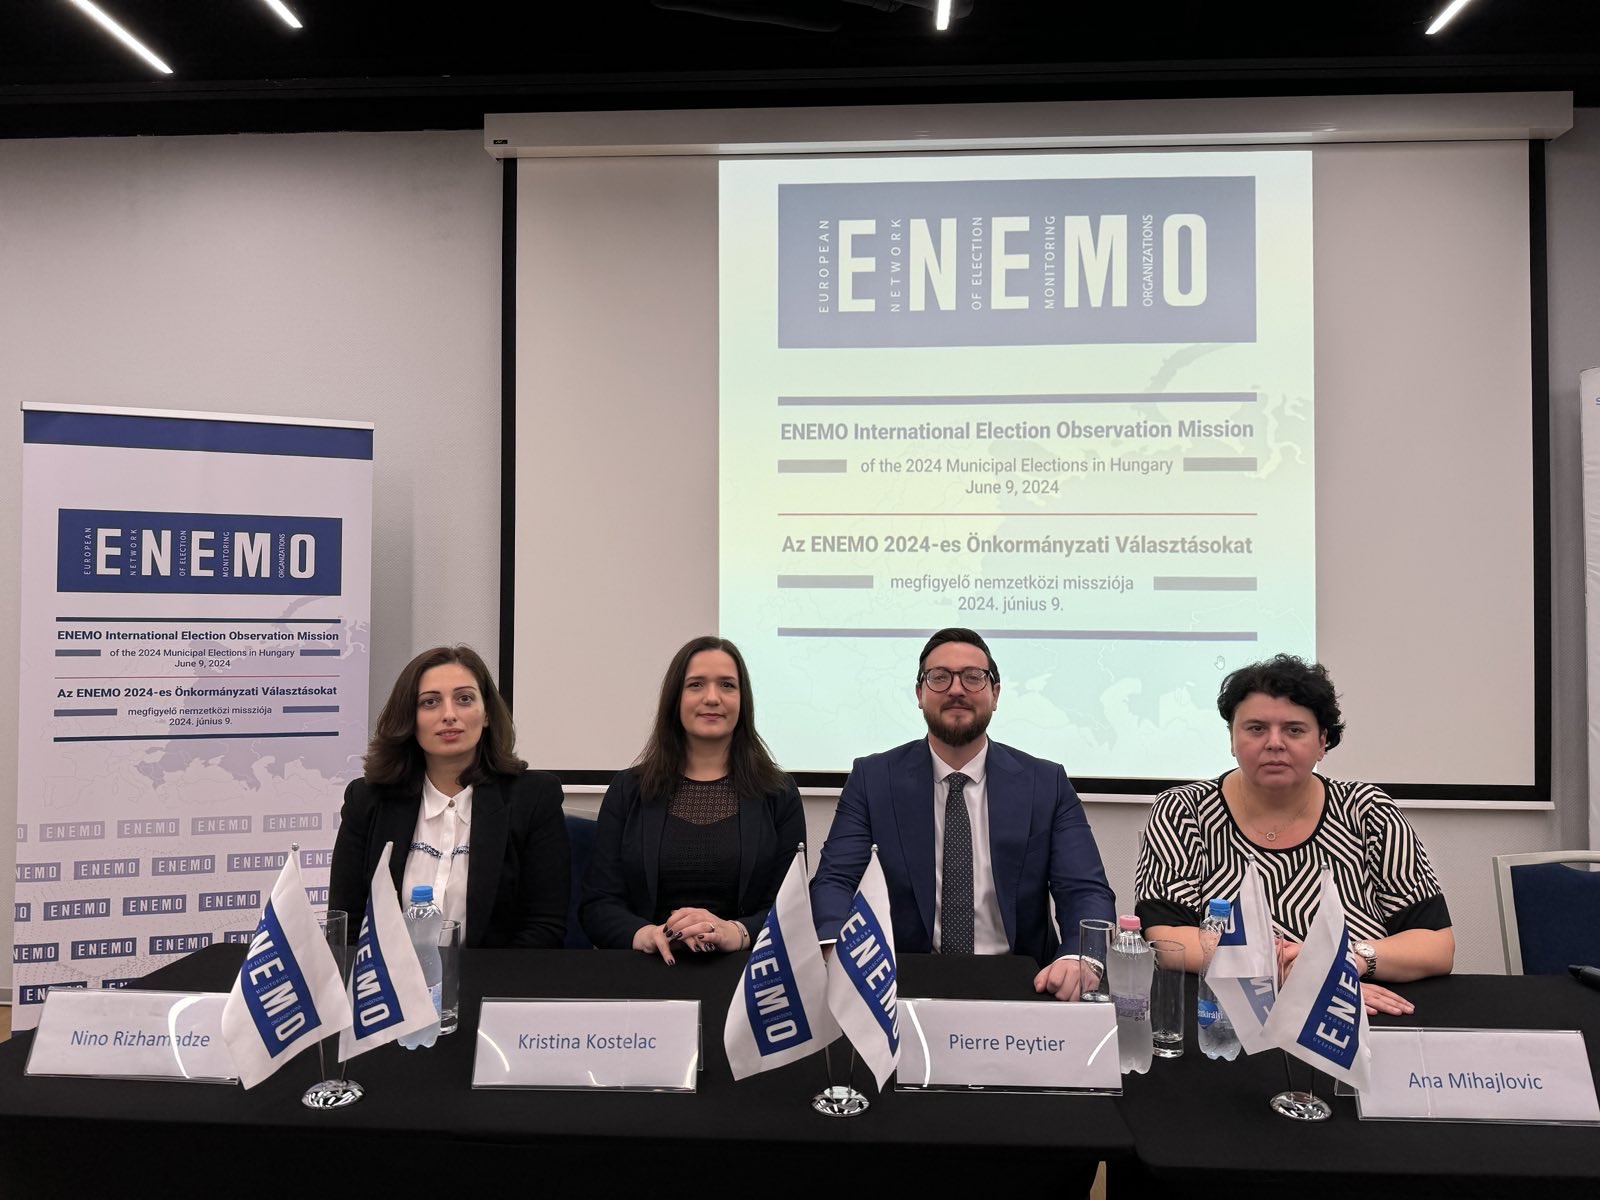 ENEMO's EOM to the 2024 Municipal elections in Hungary held its first press conference to officially announce the mission